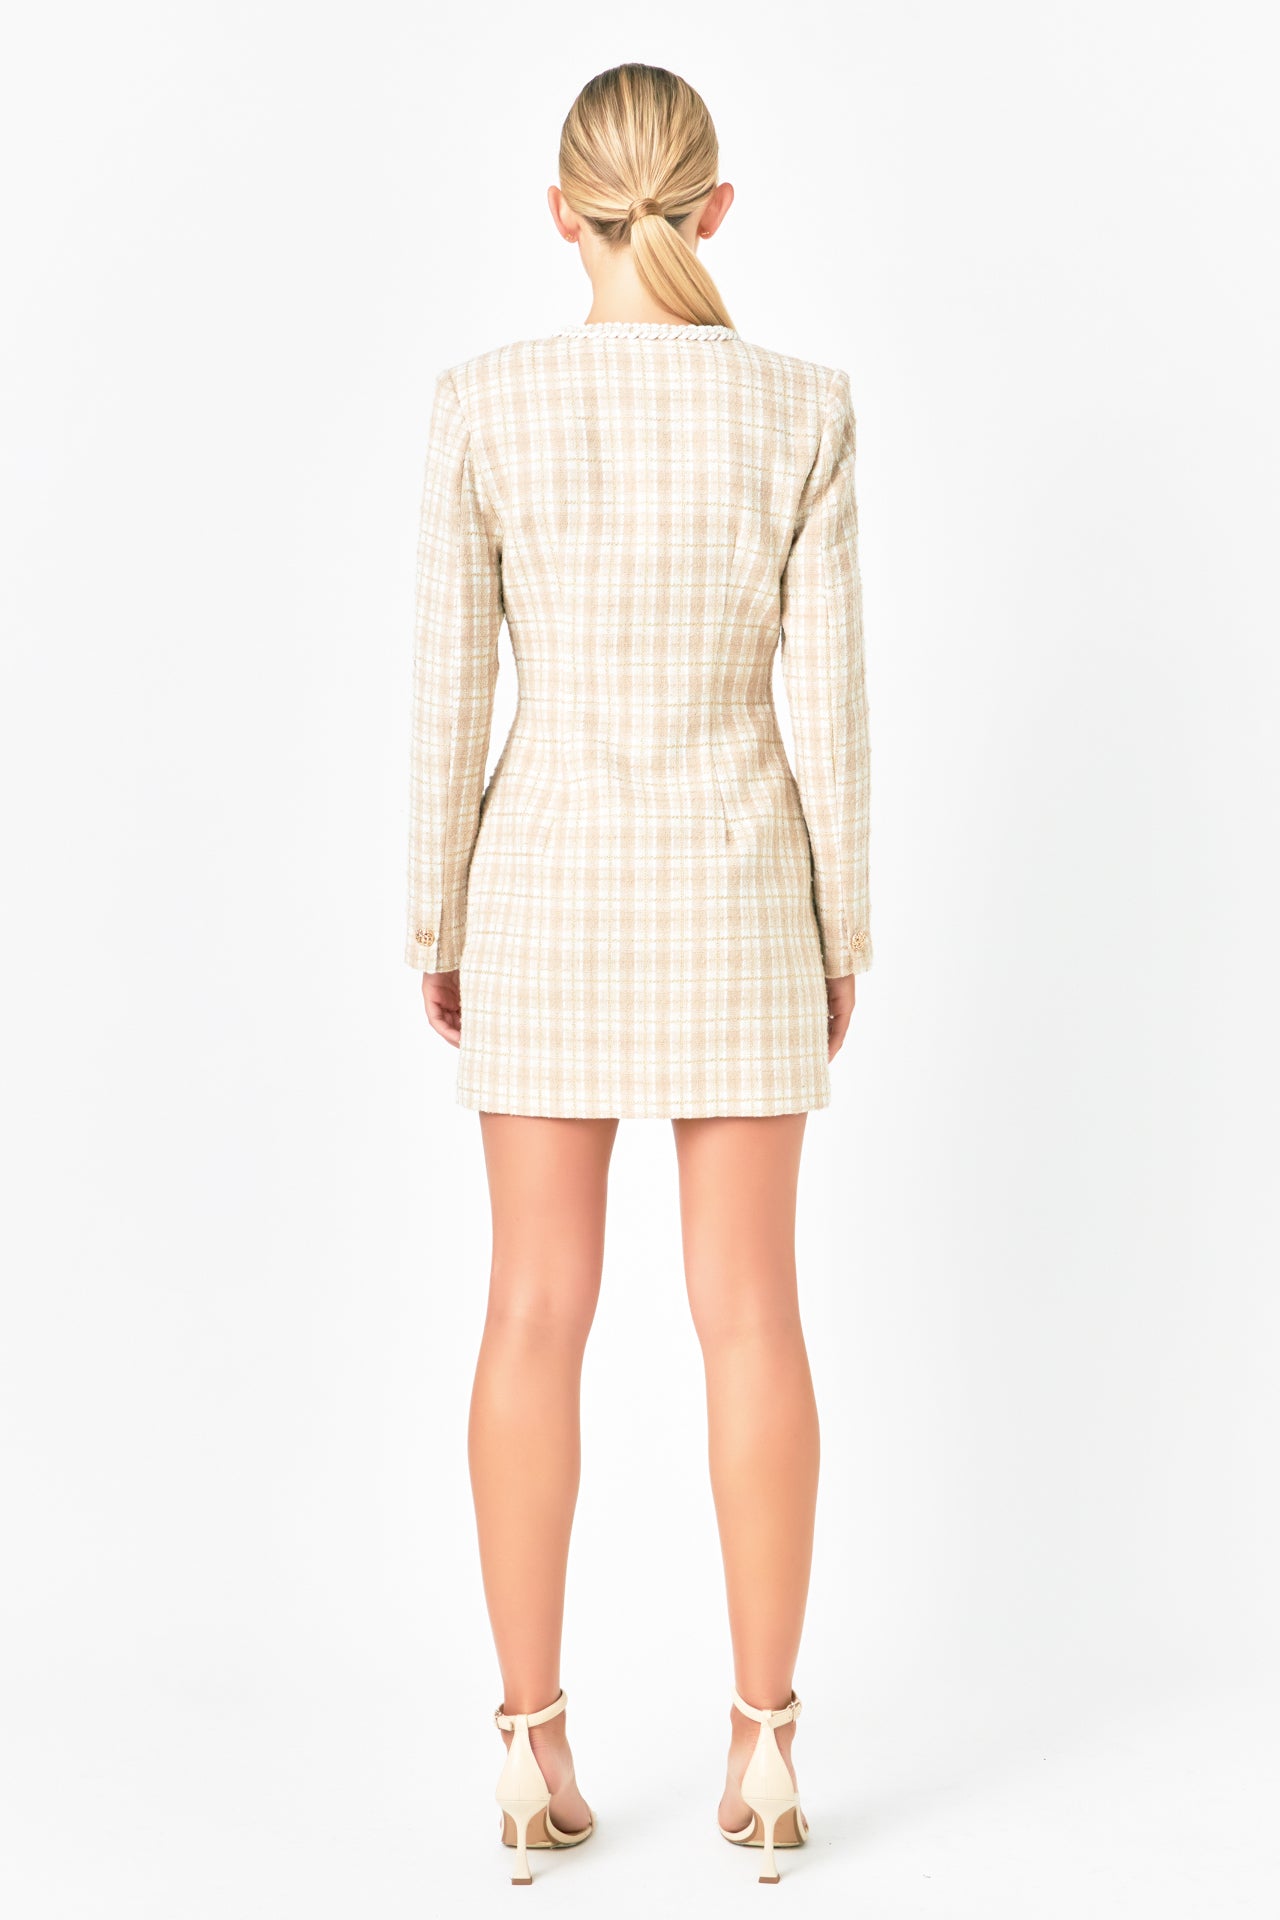 ENDLESS ROSE - Premium Long Sleeve Tweed Mini Dress - DRESSES available at Objectrare